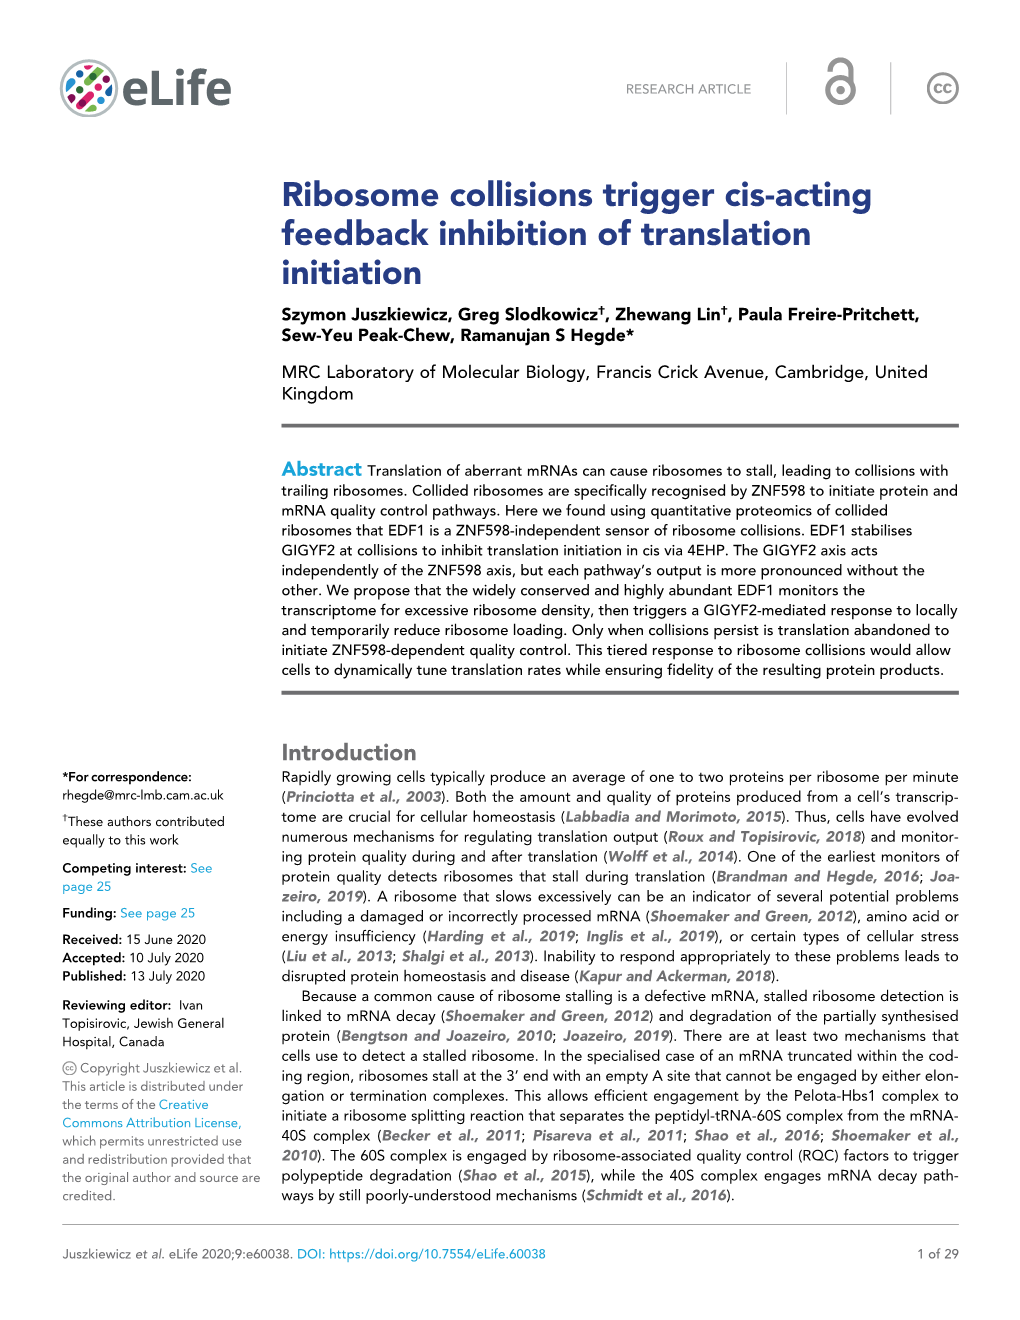 Ribosome Collisions Trigger Cis-Acting Feedback Inhibition of Translation Initiation